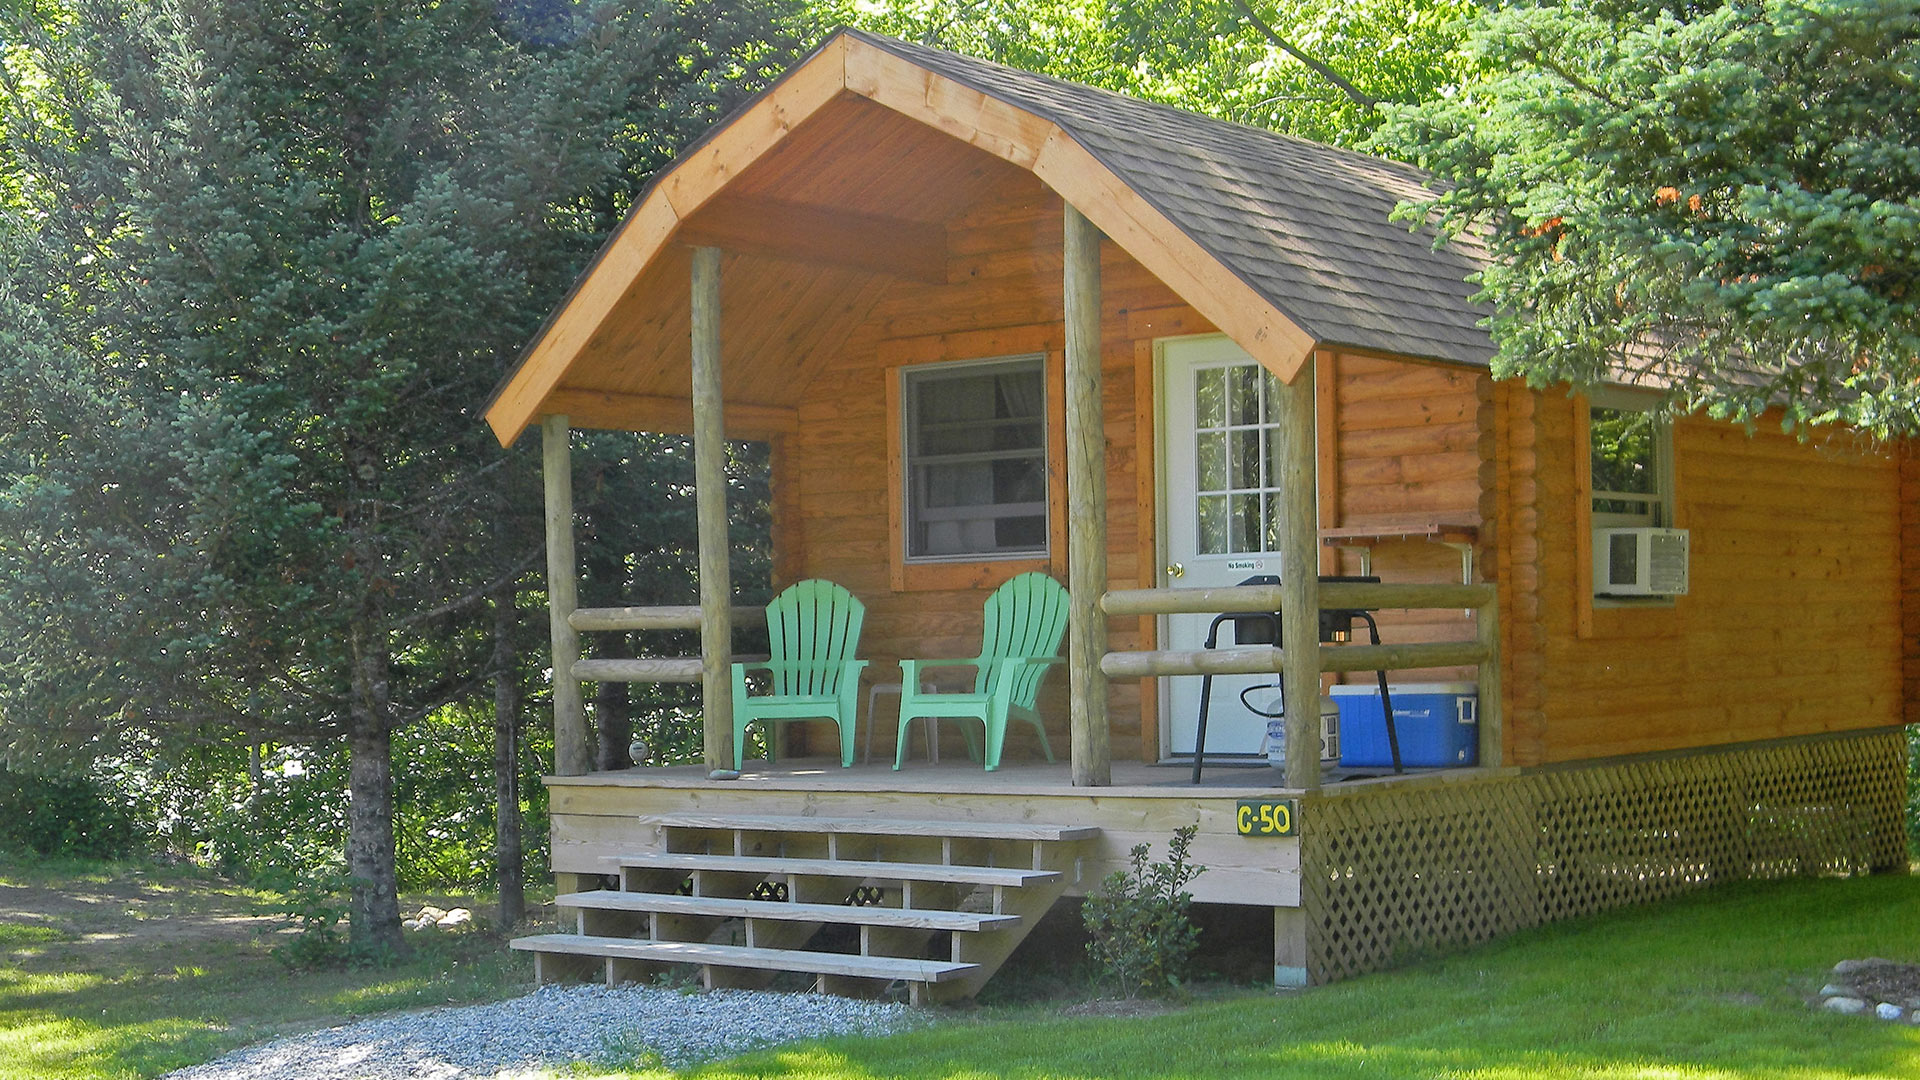 A rental cabin at Scenic View Campground